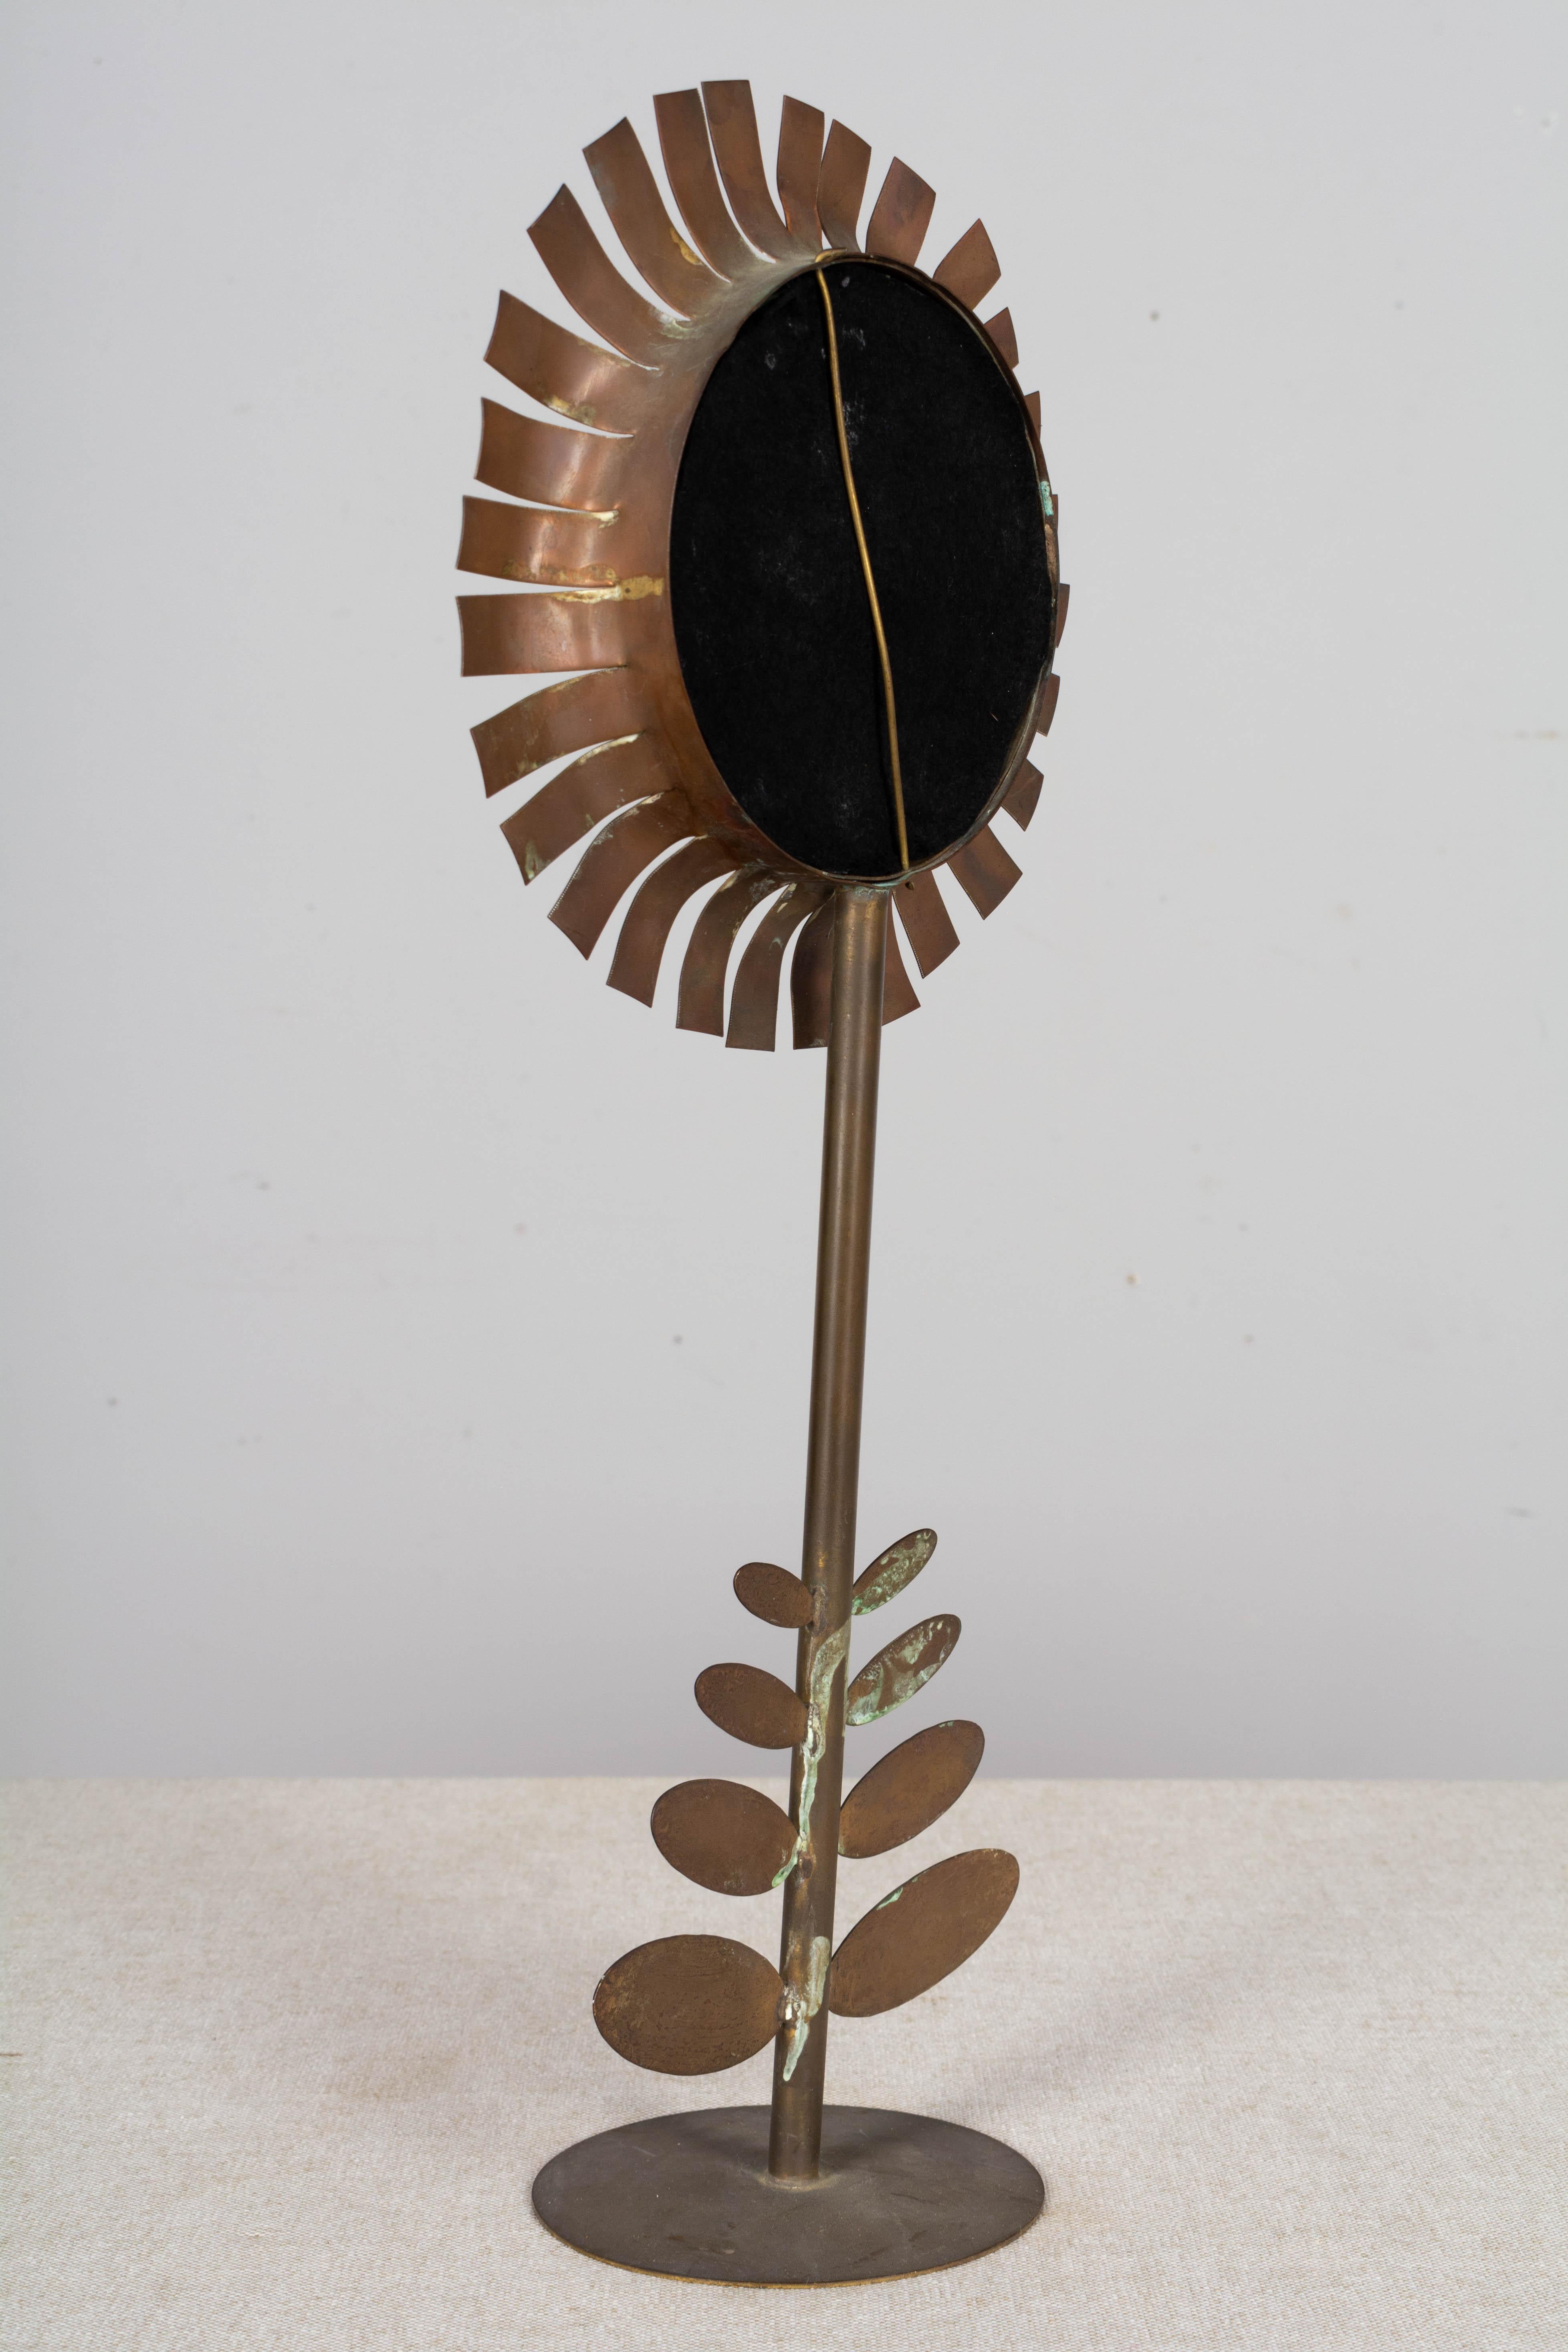 Hand-Crafted Mid Century Jere Style Flower Sculpture with Mirror